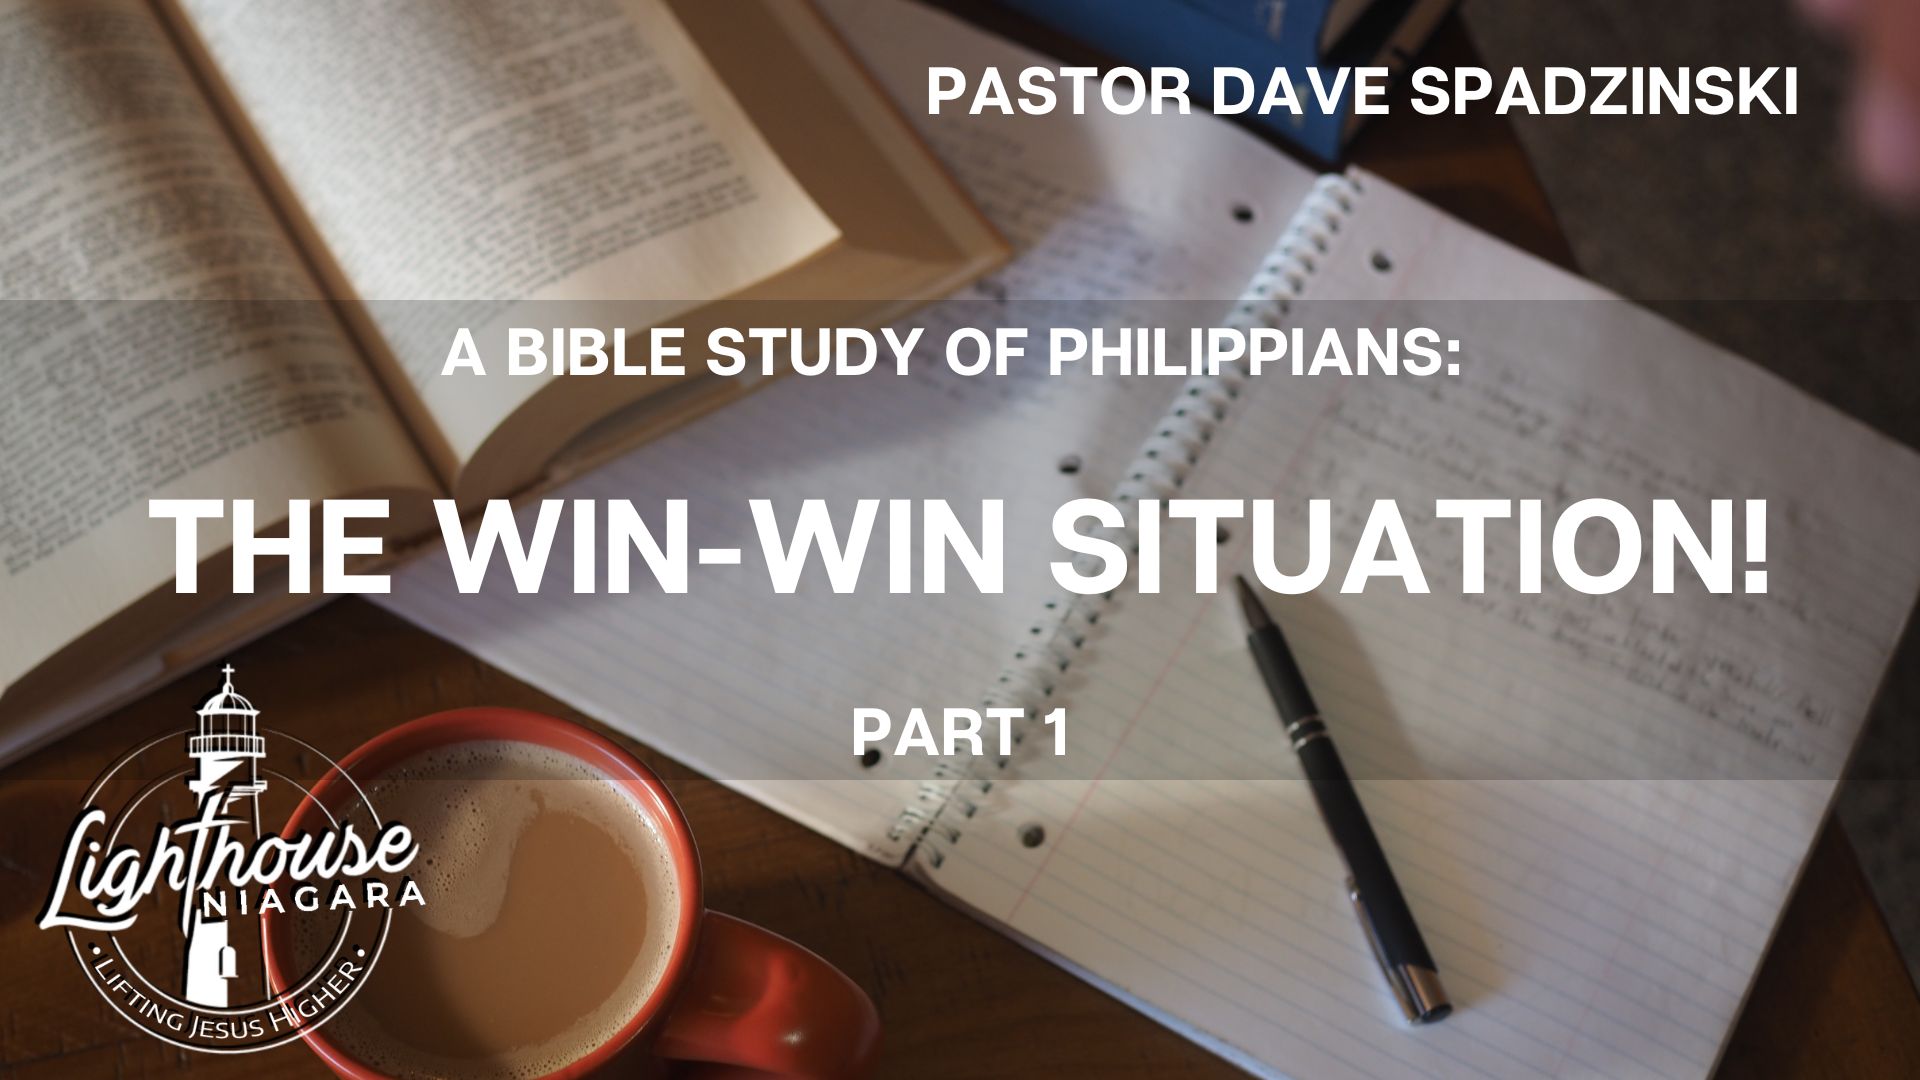 A Bible Study Of Philippians: The Win-Win Situation - Pastor Dave Spadzinski